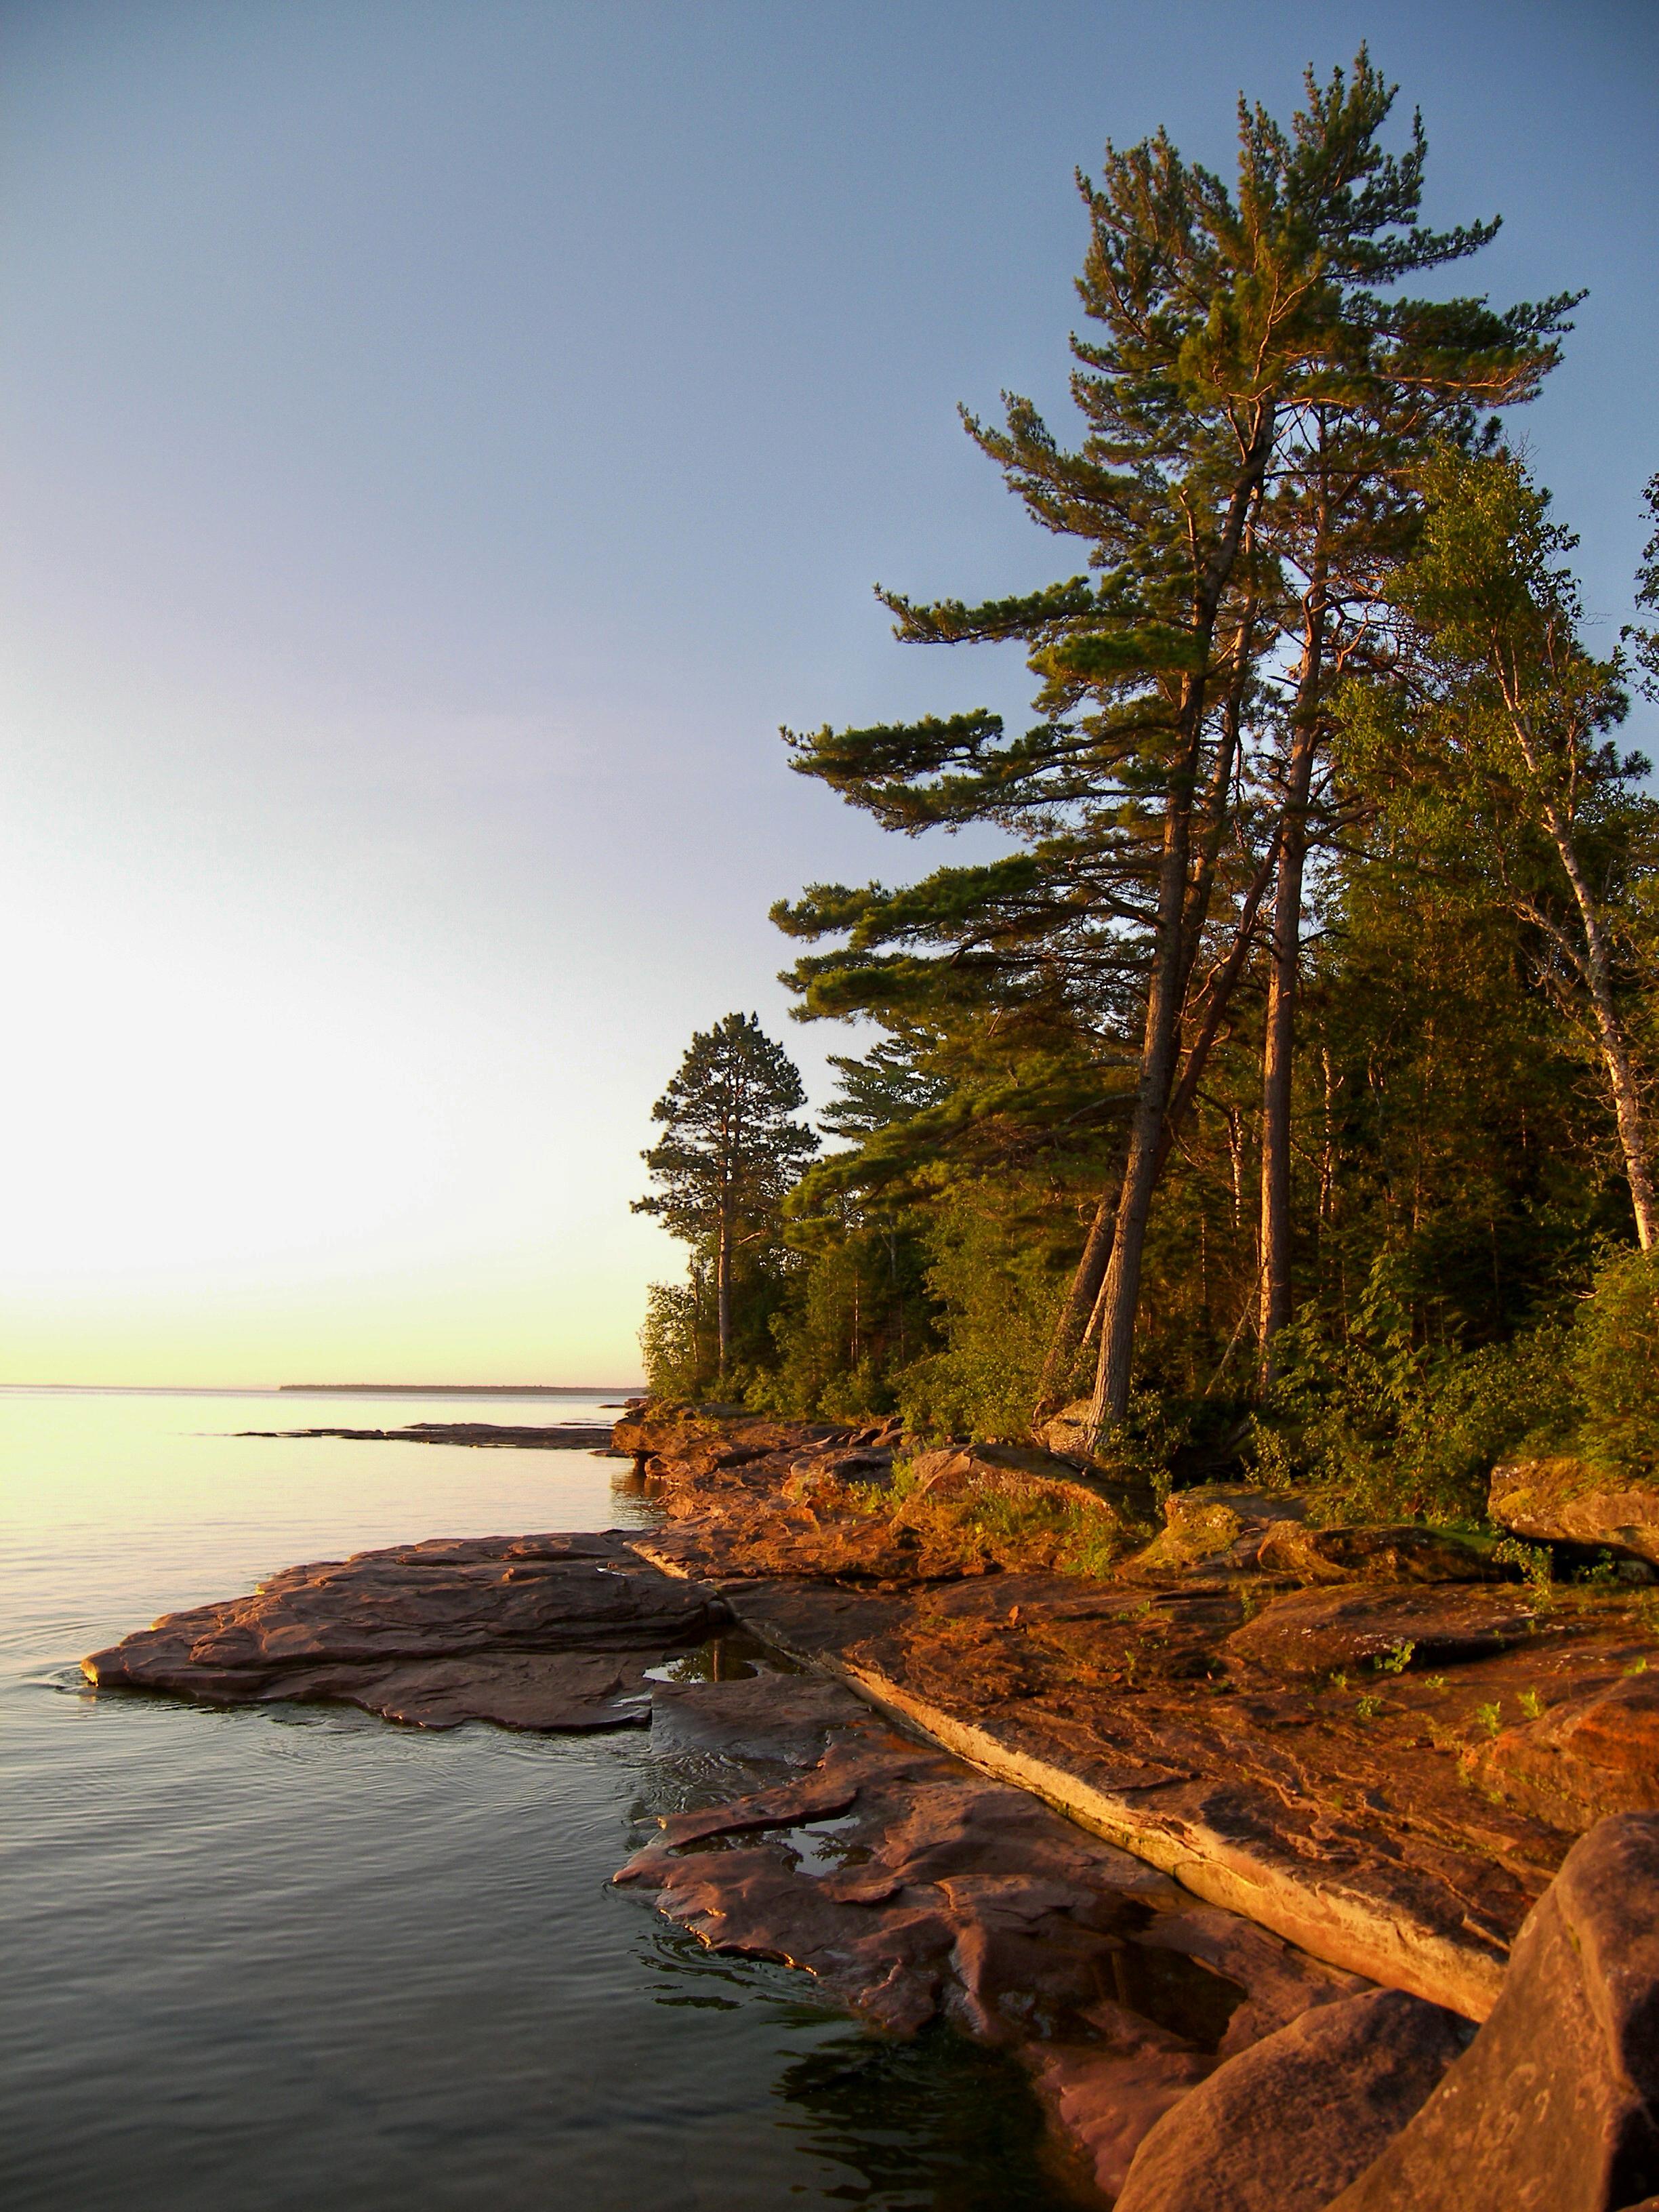 A rocky shoreline meets the calm water of a lake at sunset.